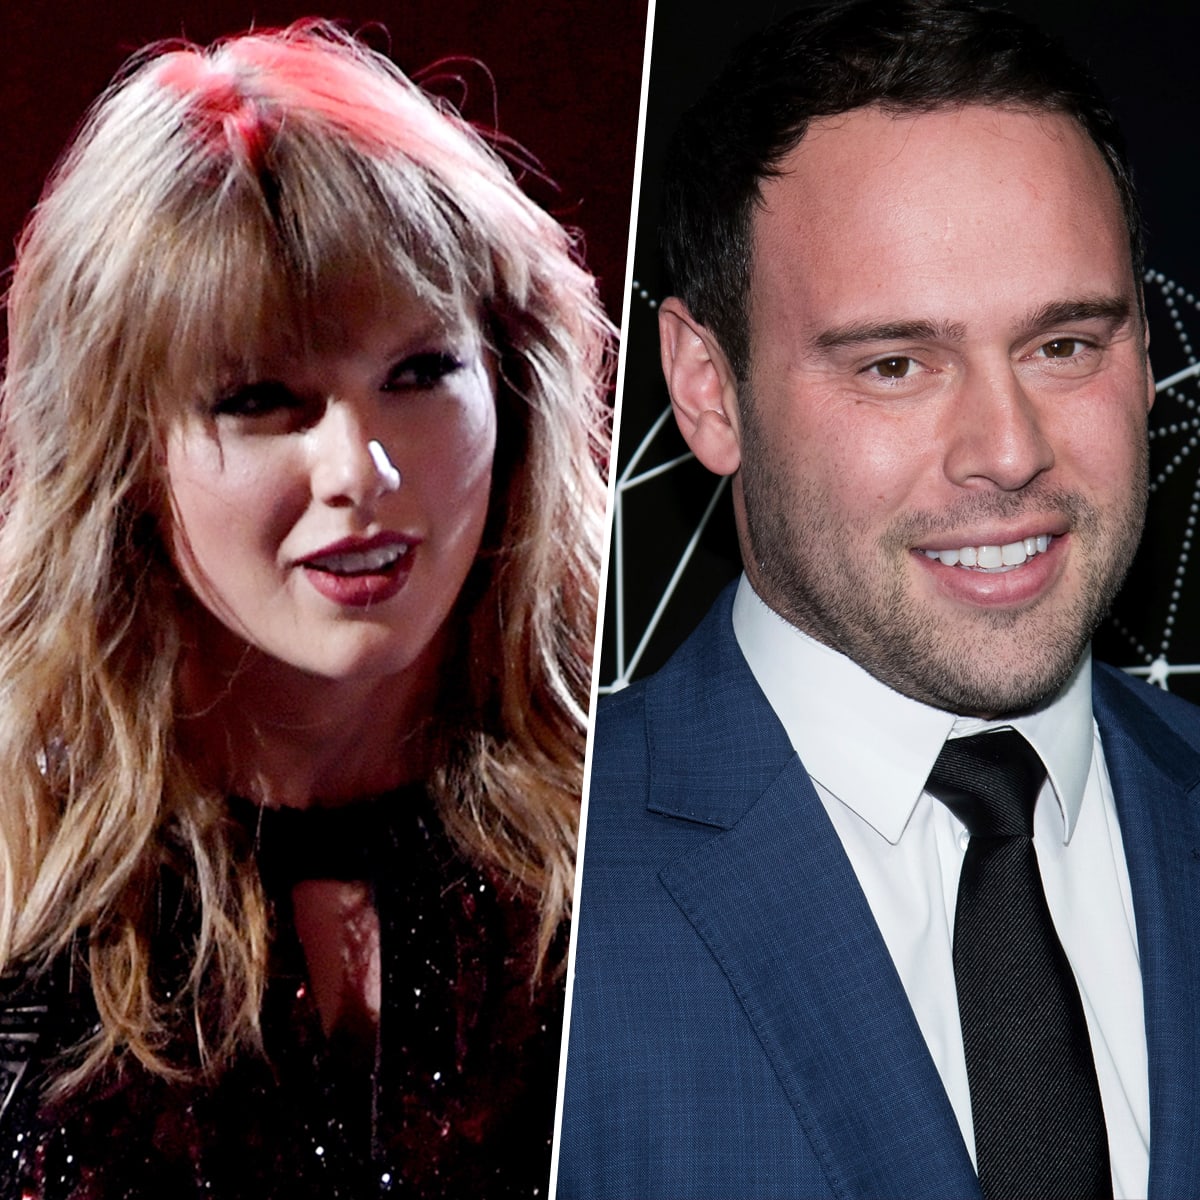 Sex Taylor Swift - Taylor Swift's beef with Scooter Braun: Everything you need to know